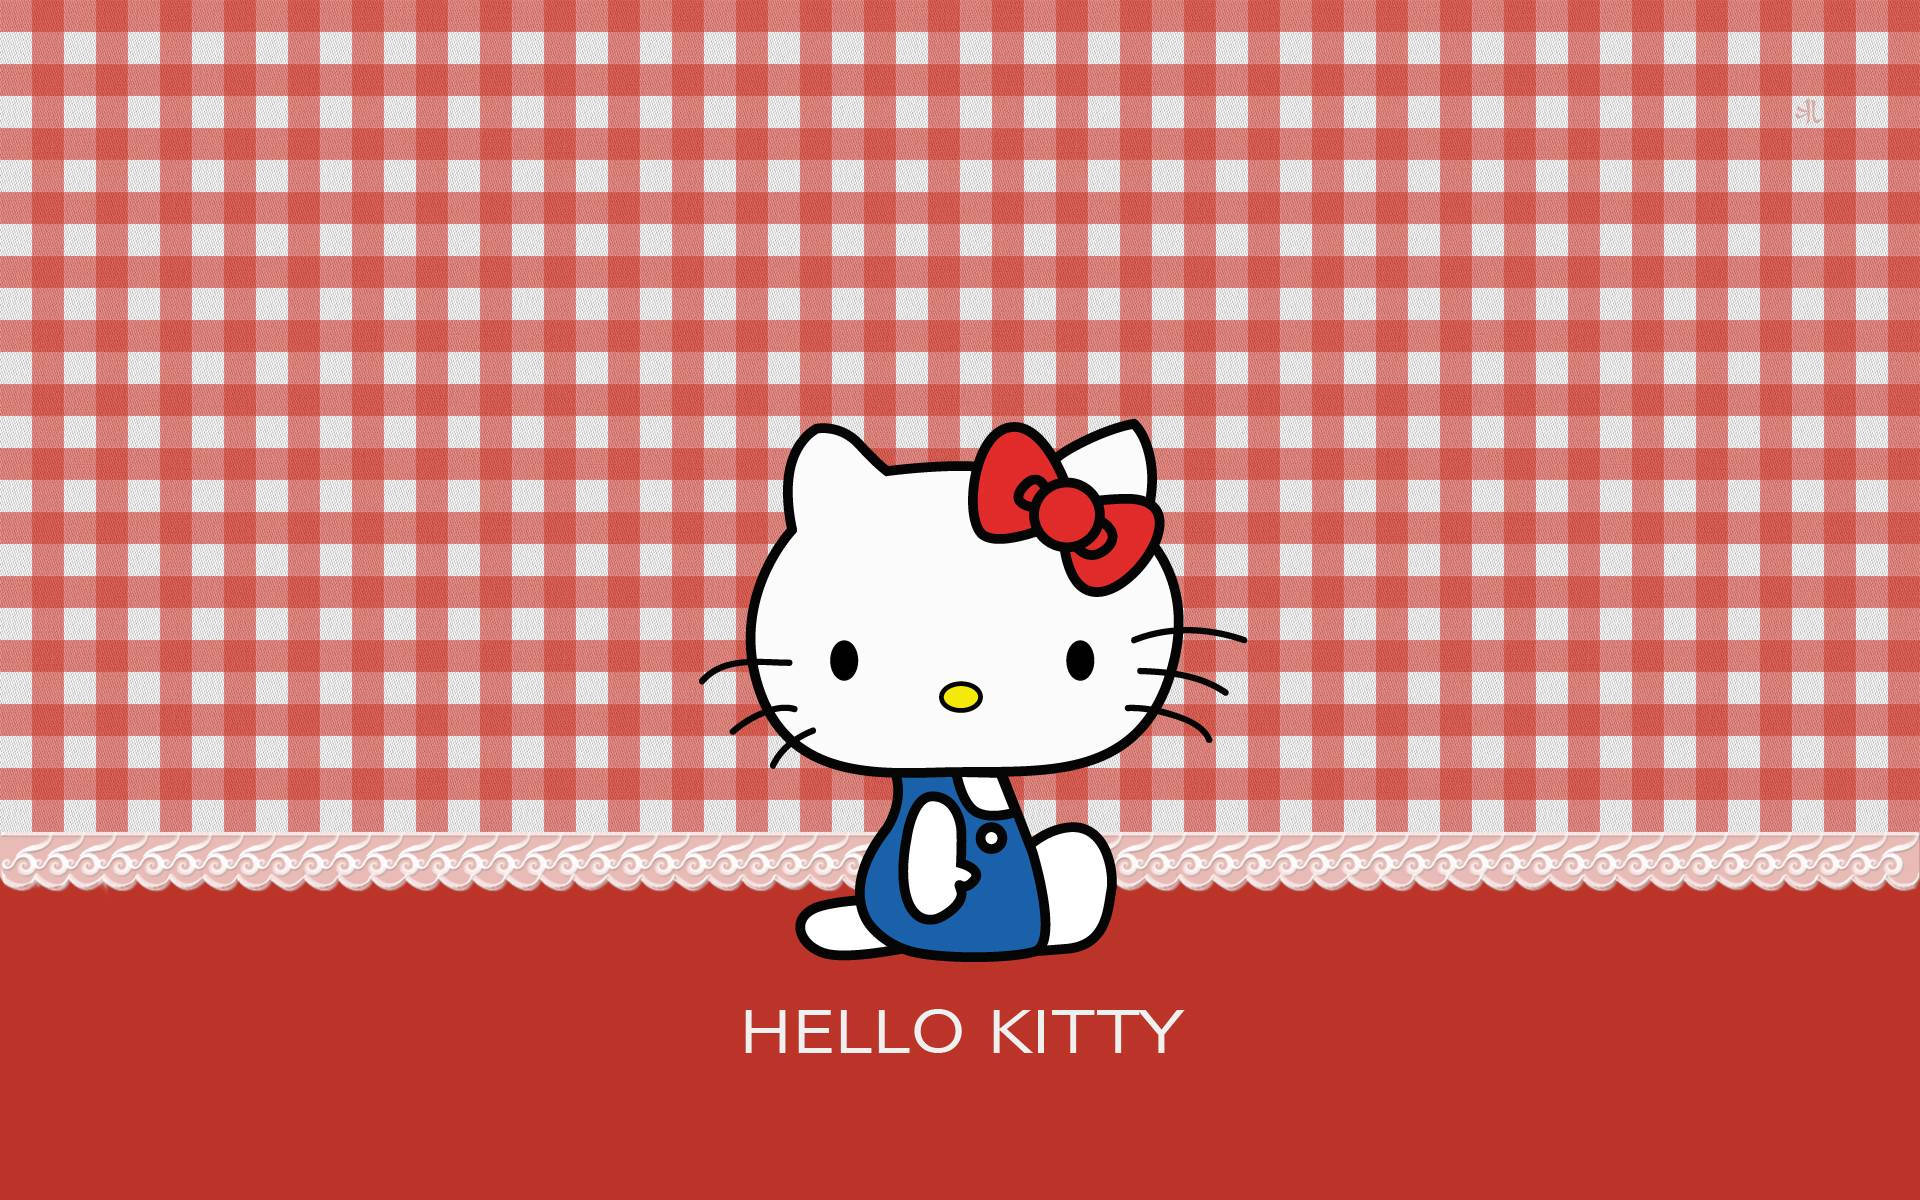 Red Kitty, Ready To Go Anywhere! Background